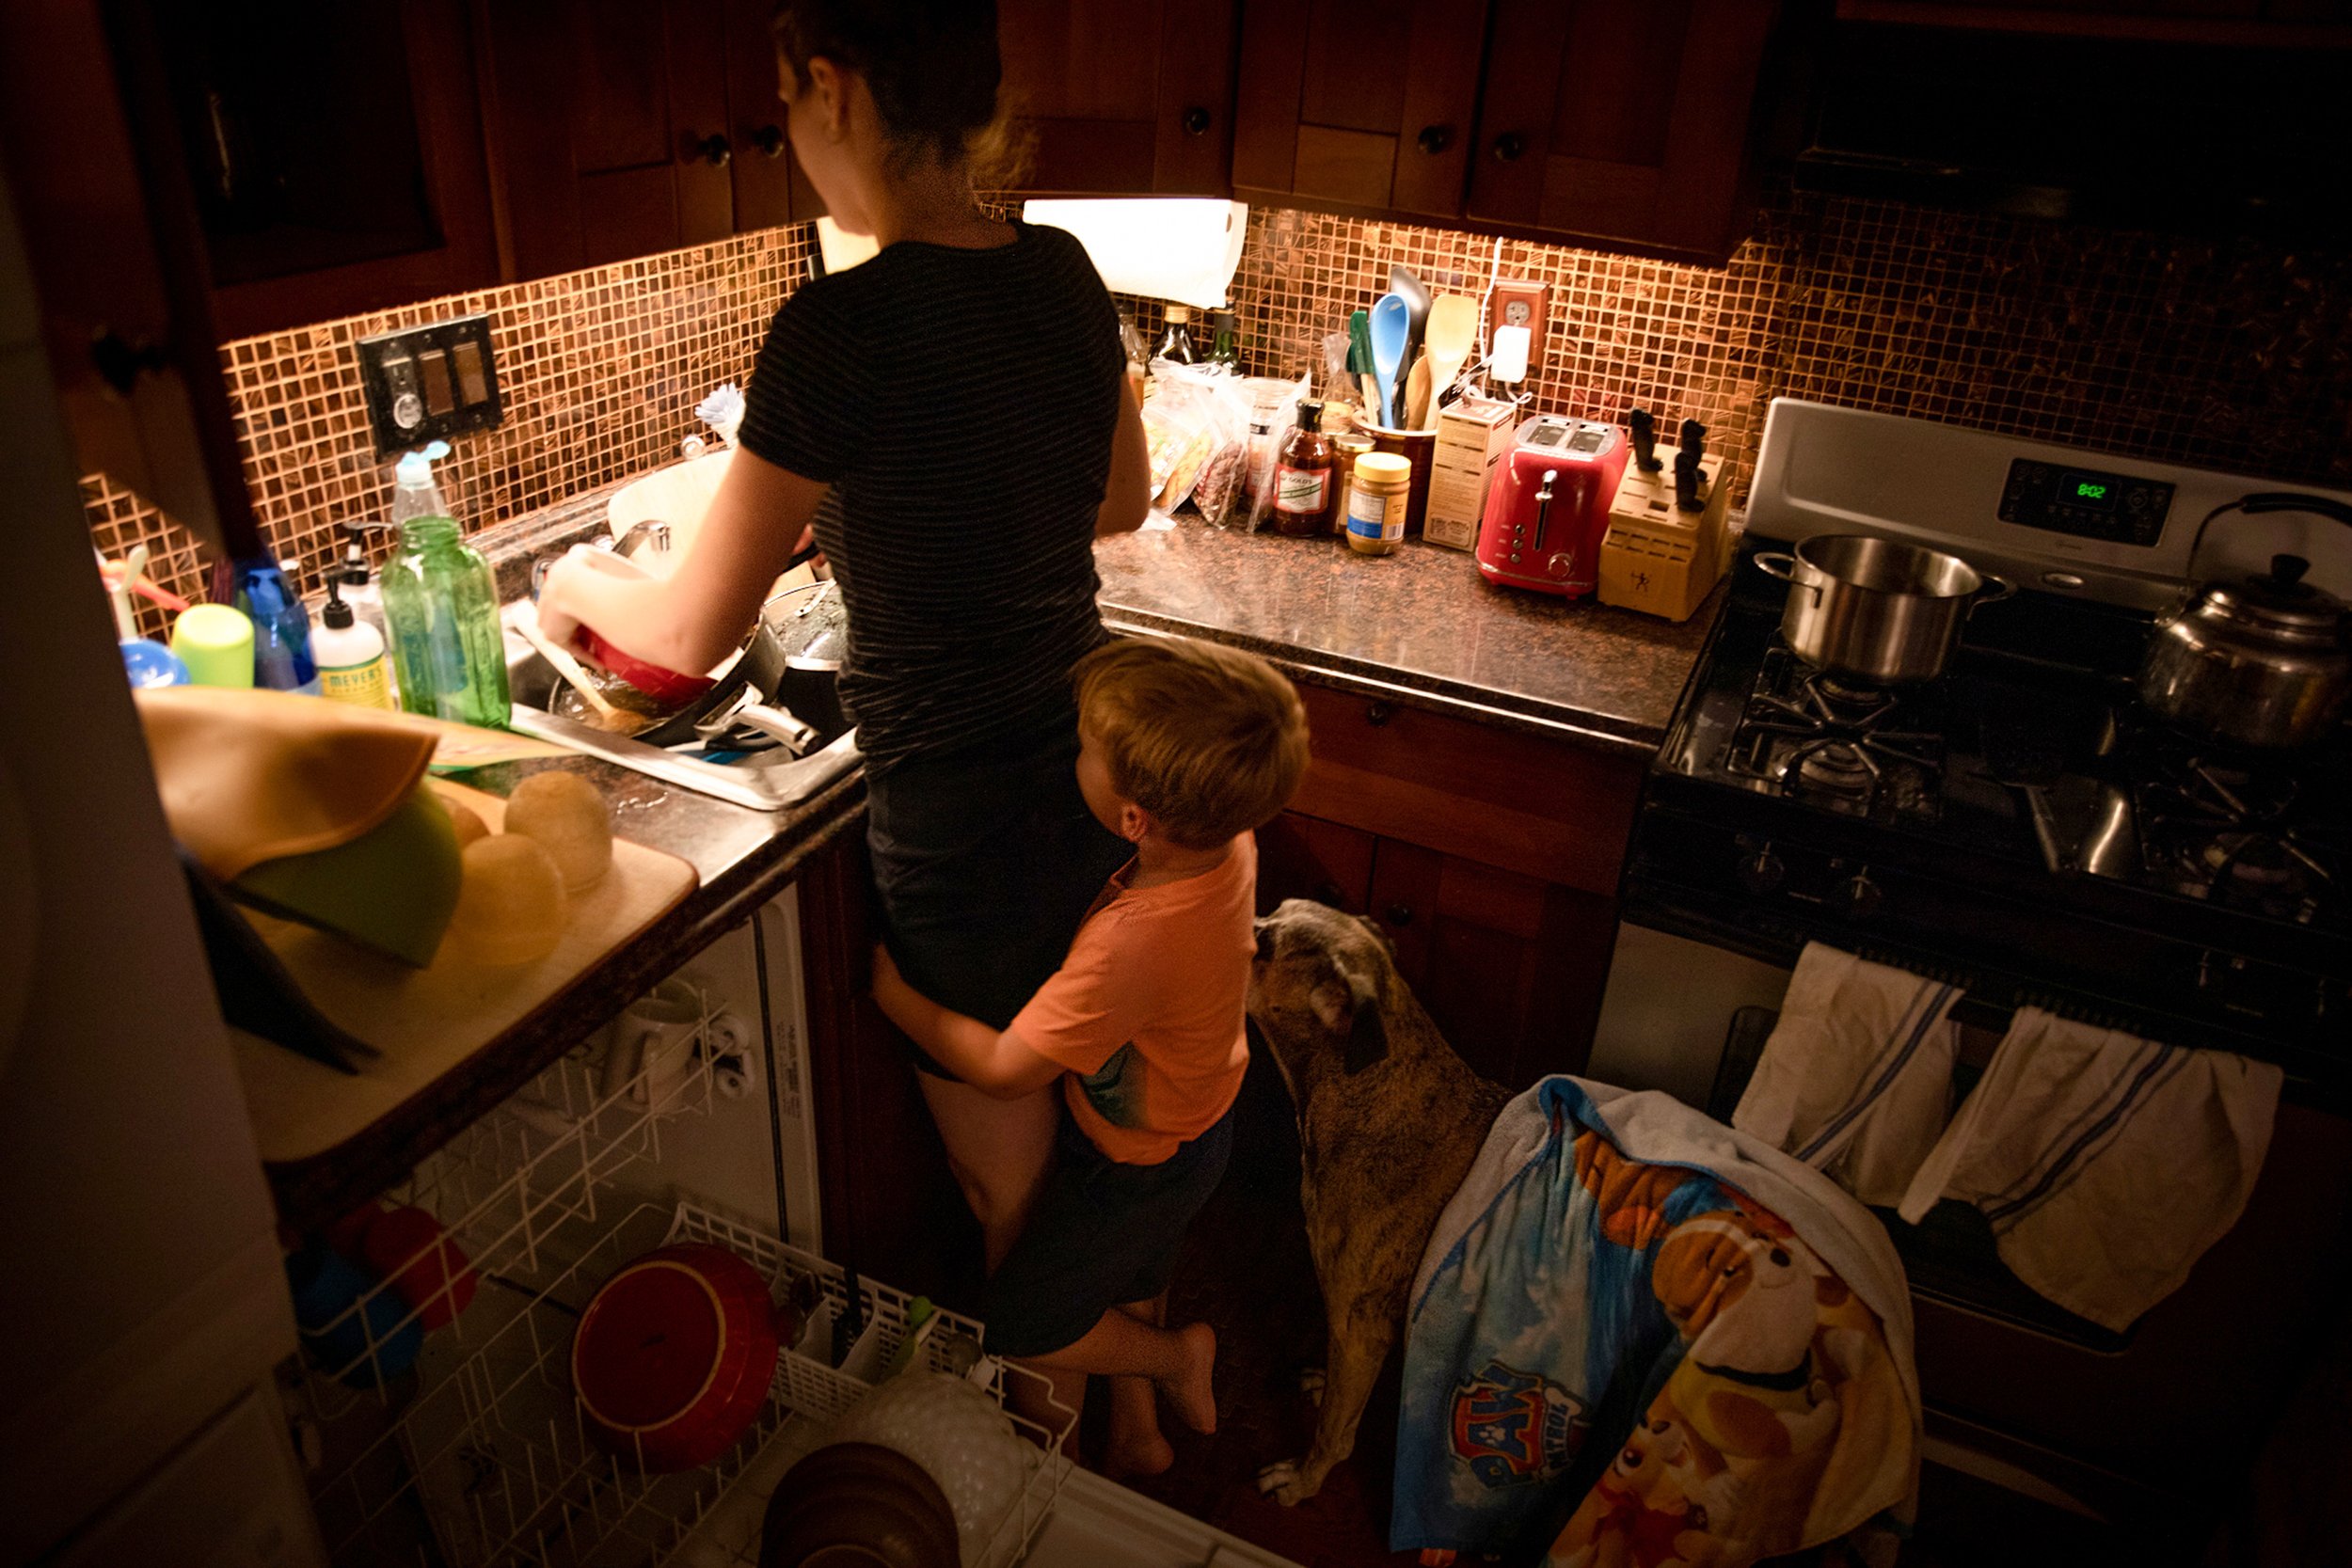  Kathy Reese, attempts to wash the dinner pots, while her 4 year old son David, hugs her legs and dog, Bella waits to be fed at their home in Washington DC.Kathly is the primary care giver for her son , while maintaining a 40 hour work week from home